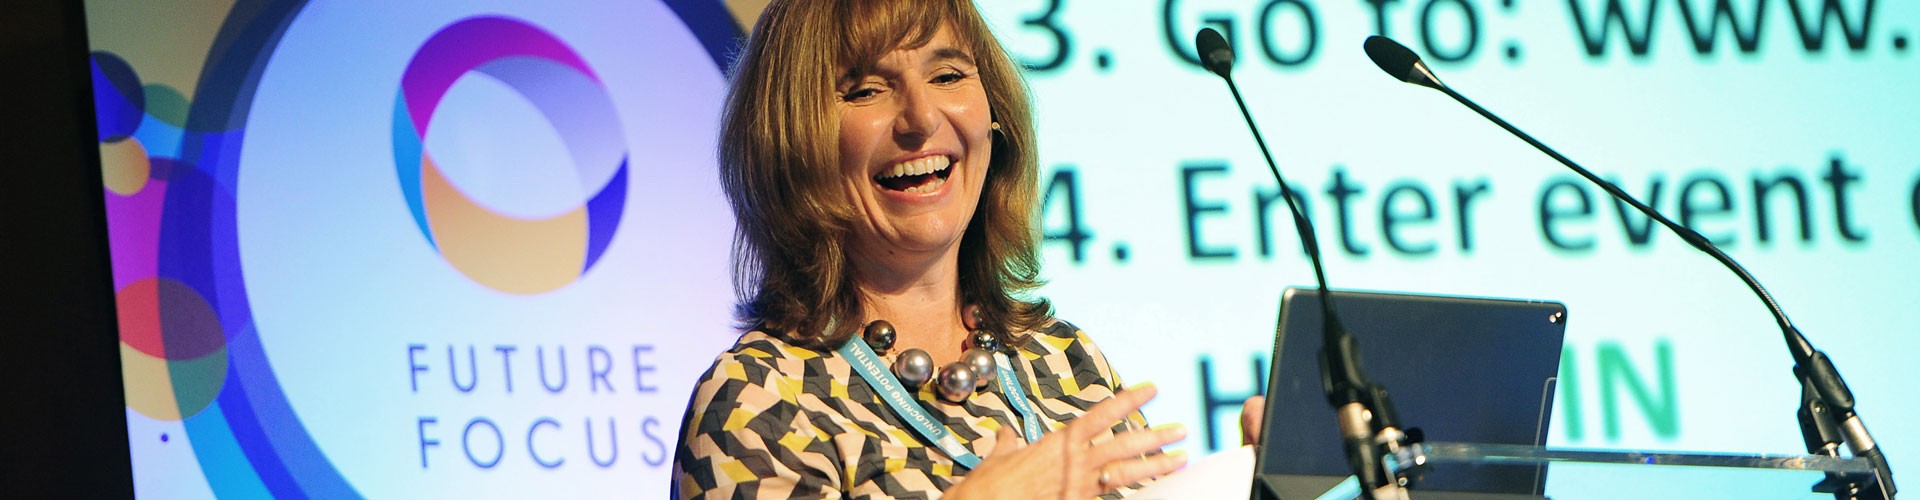 smiling woman giving a presentation at a future focus event